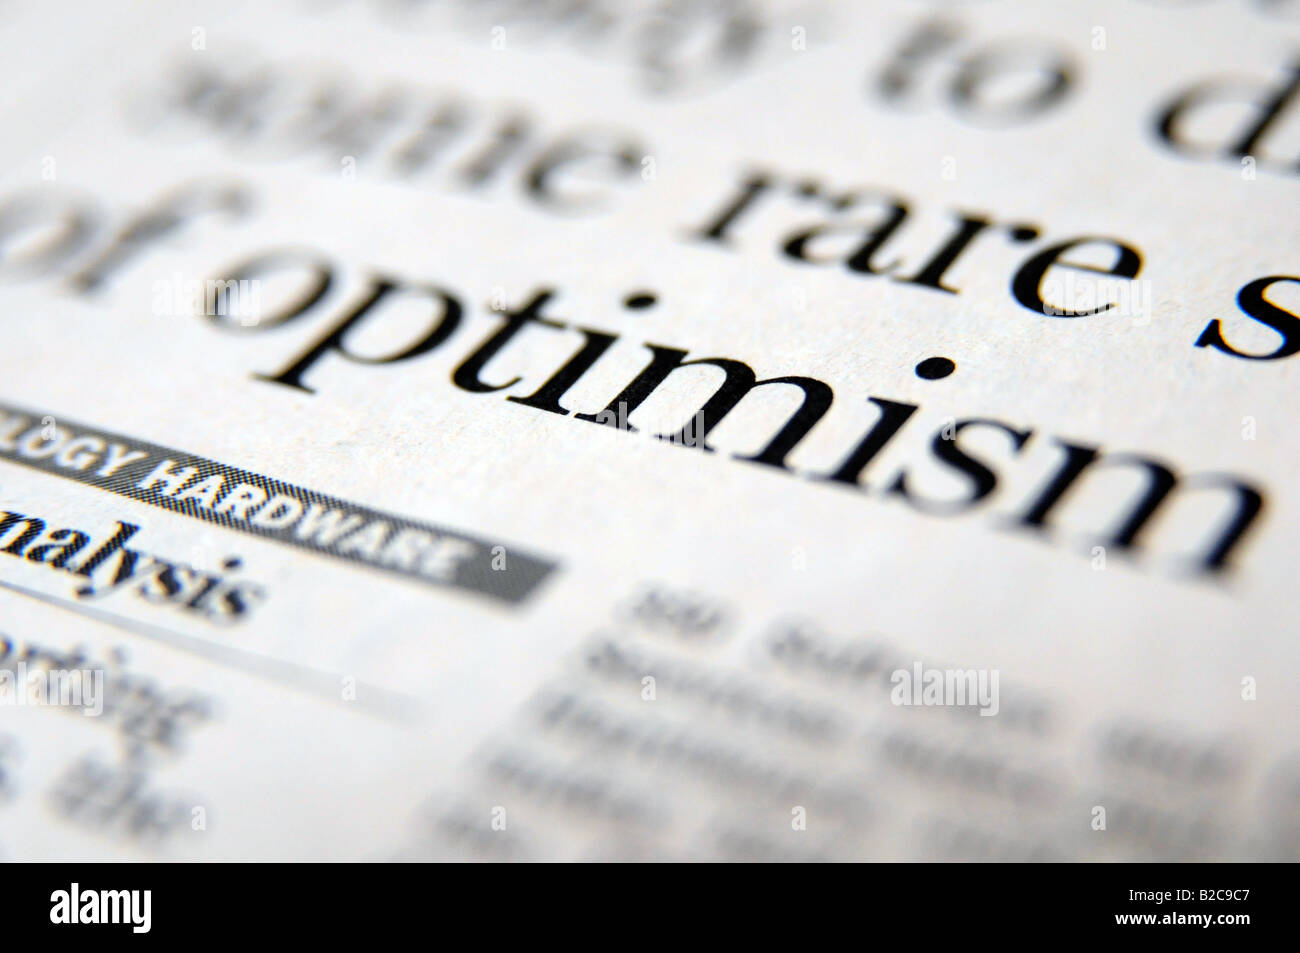 Royalty free photograph of newspaper headline about the hope of upturn and confidence and optimism returning in the market. Stock Photo